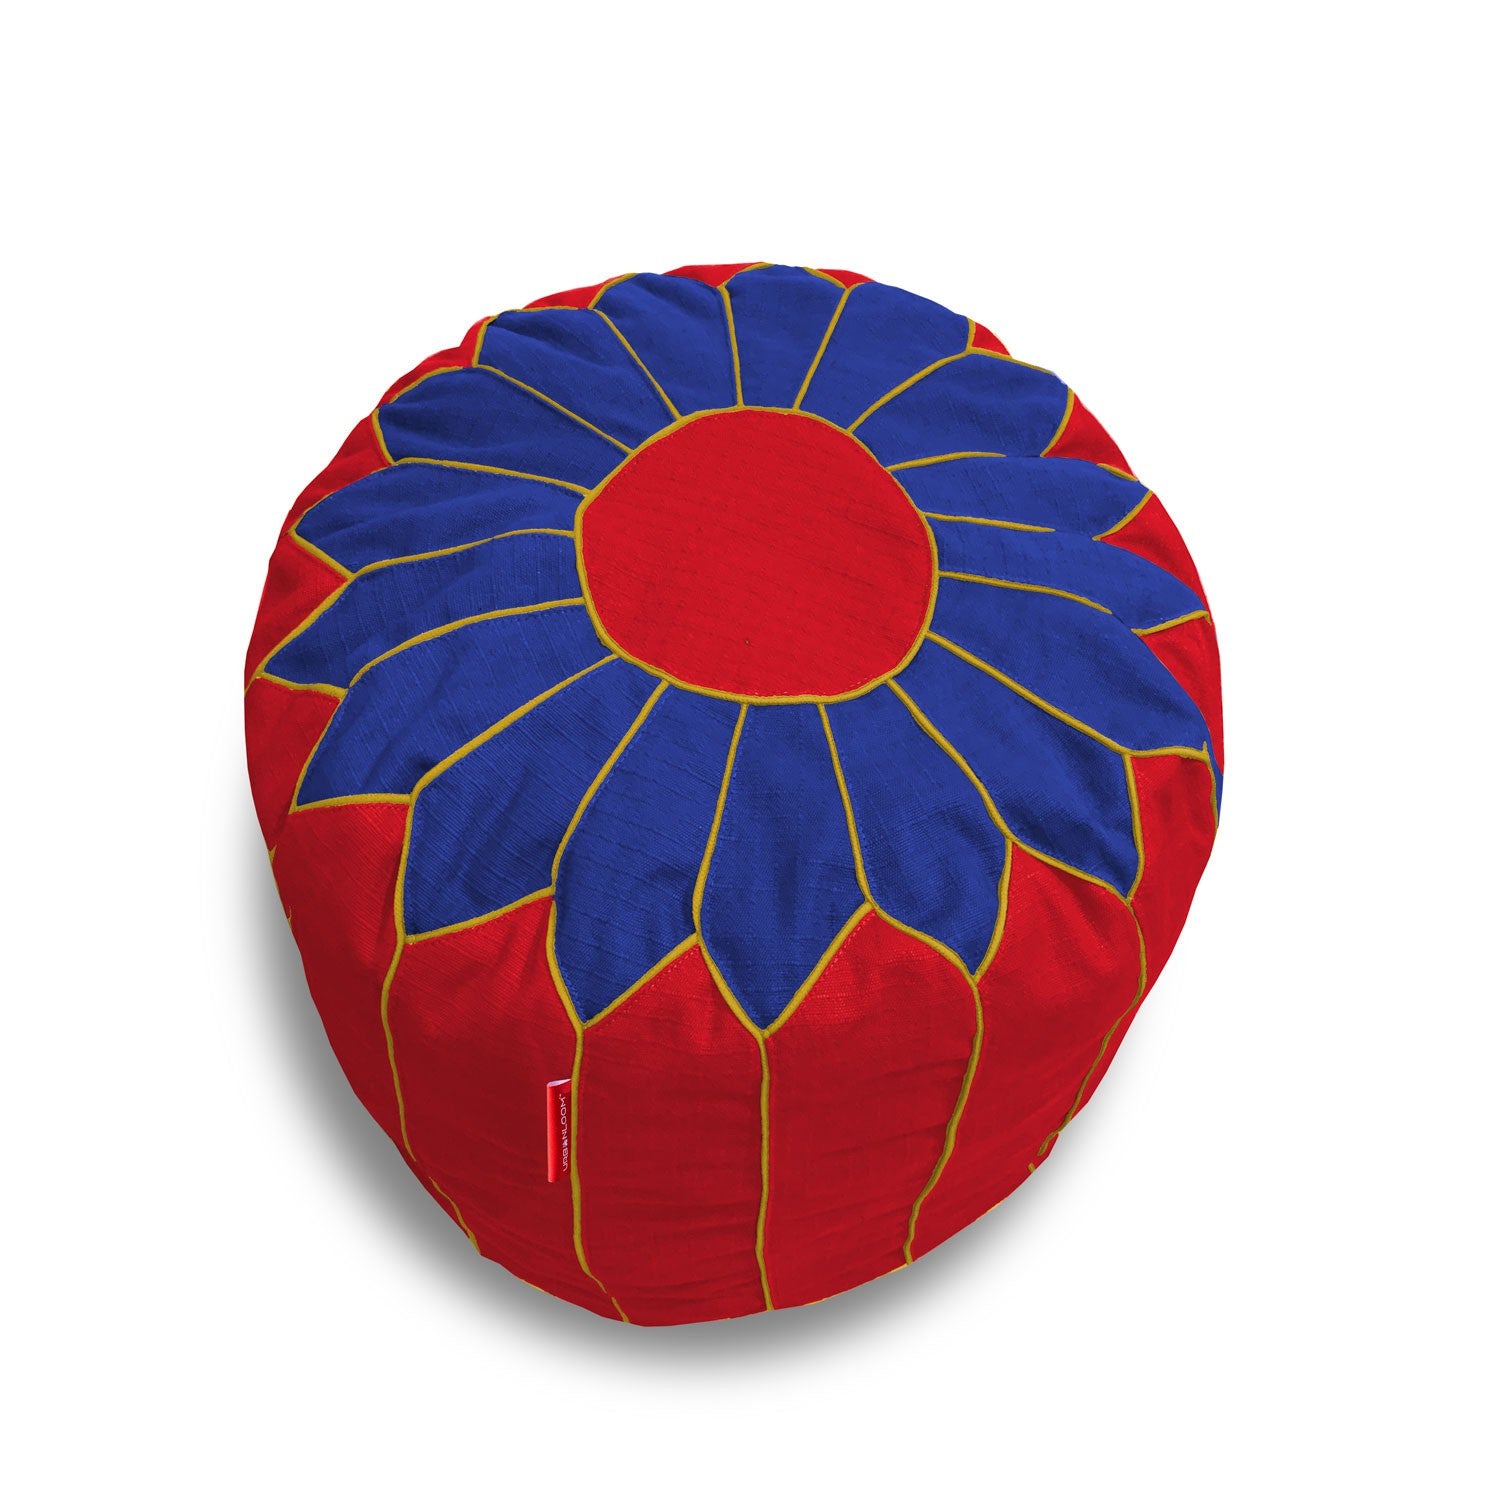 Cotton Handloom Moroccan Pouf  cover , Blue & Red